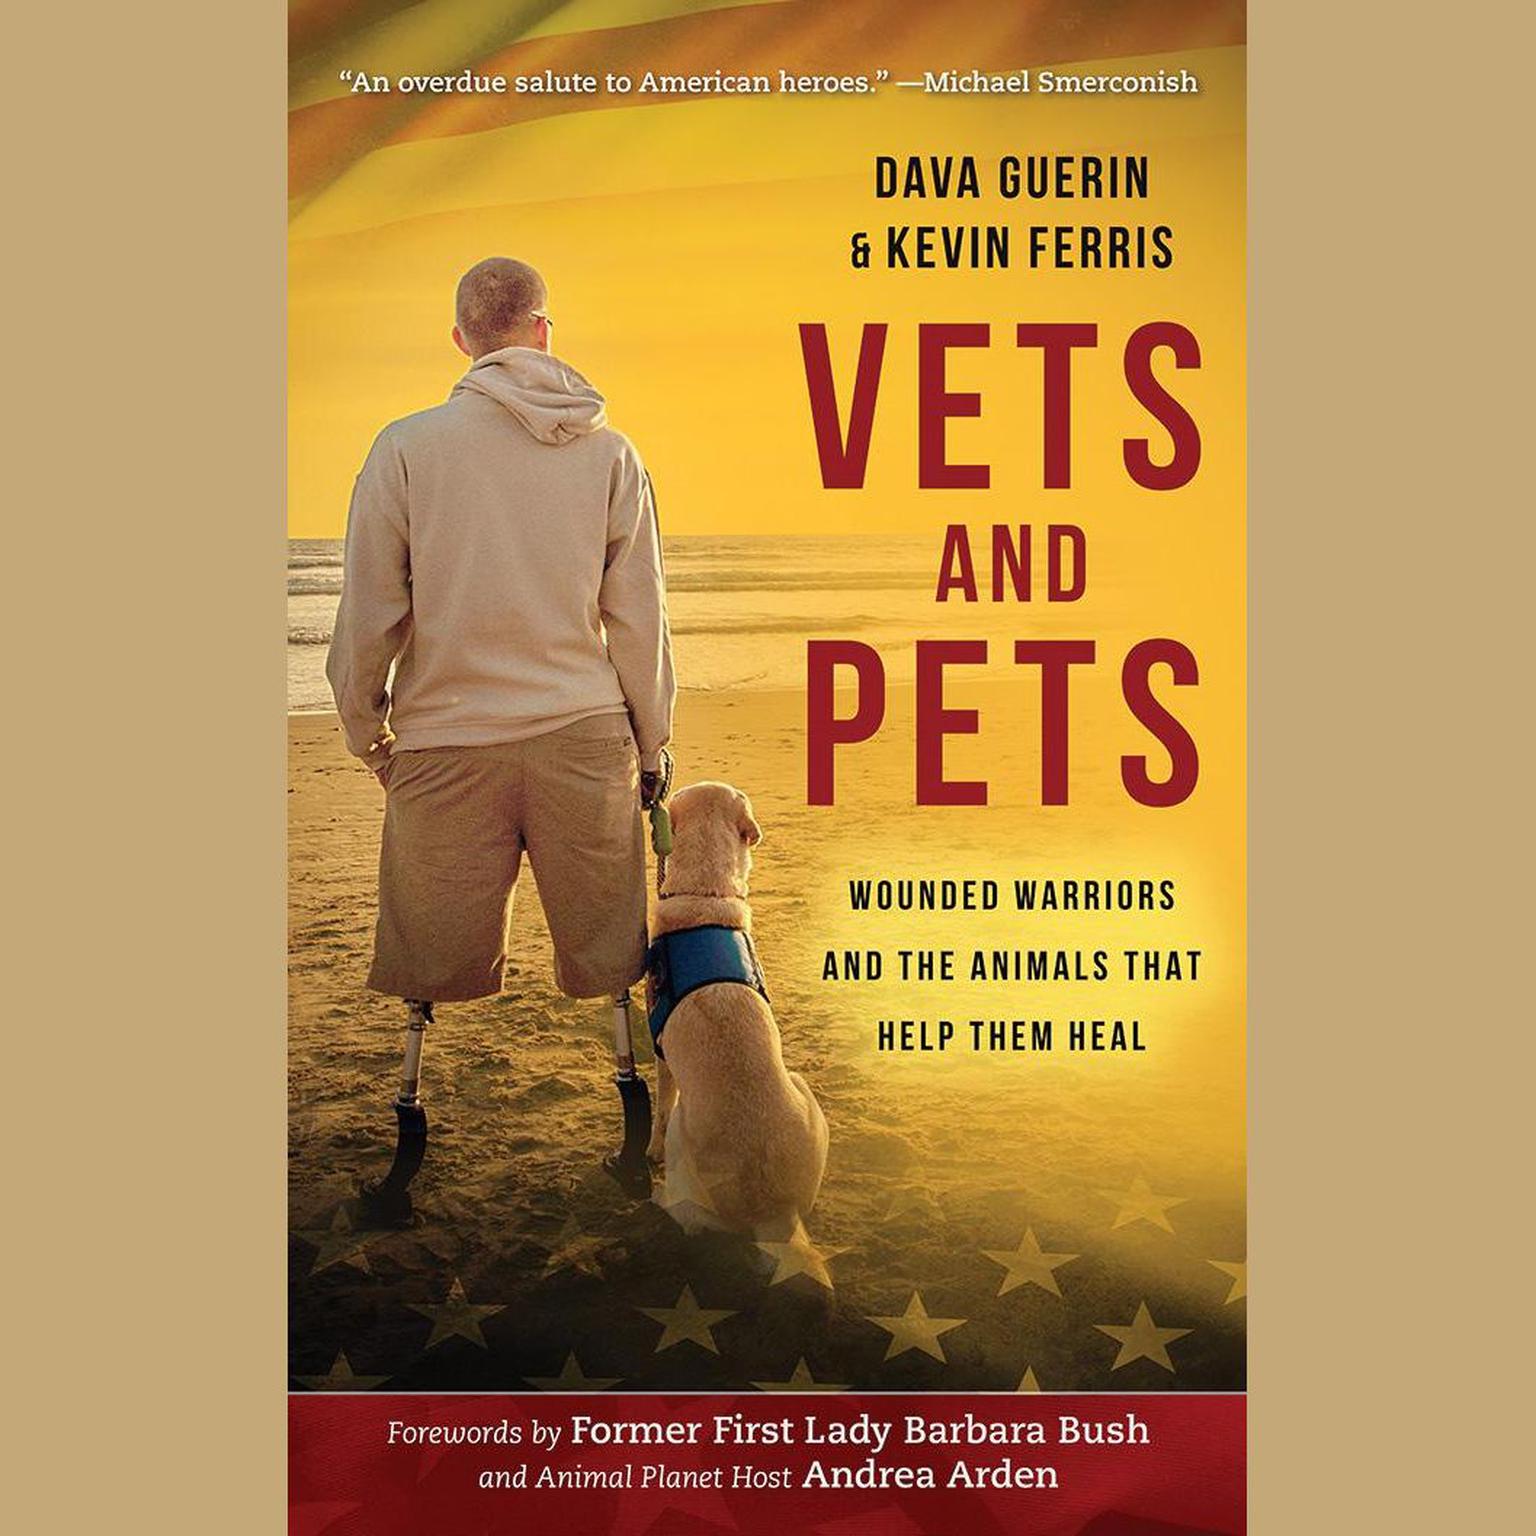 Vets and Pets: Wounded Warriors and the Animals That Help Them Heal Audiobook, by Dava Guerin